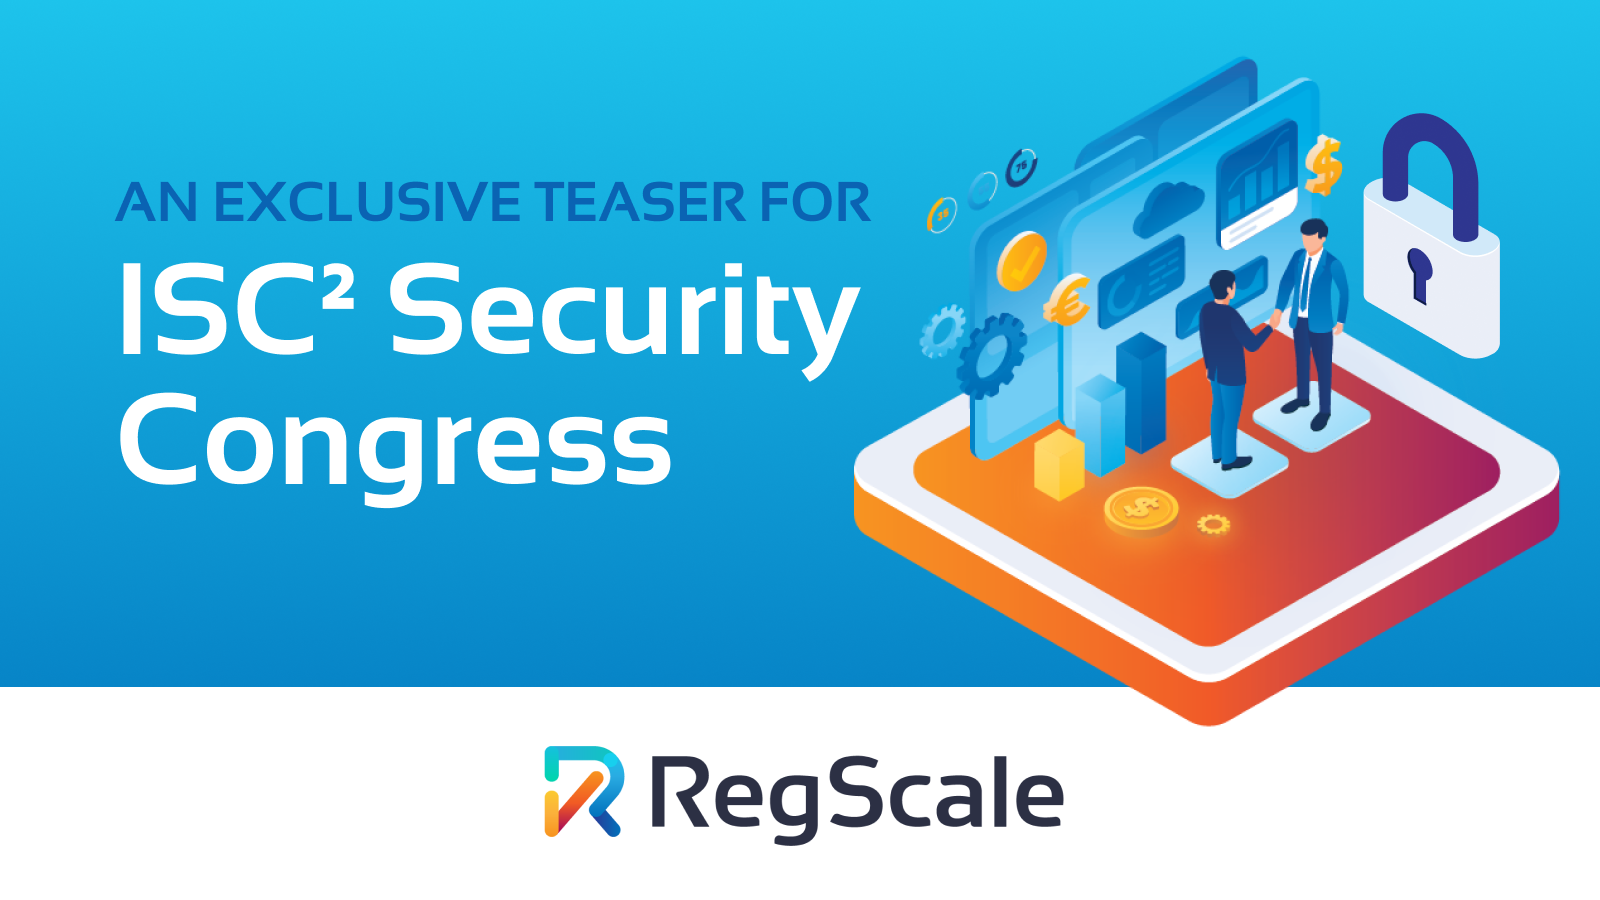 An Exclusive Teaser for ISC2 Security Congress graphic with RegScale logo